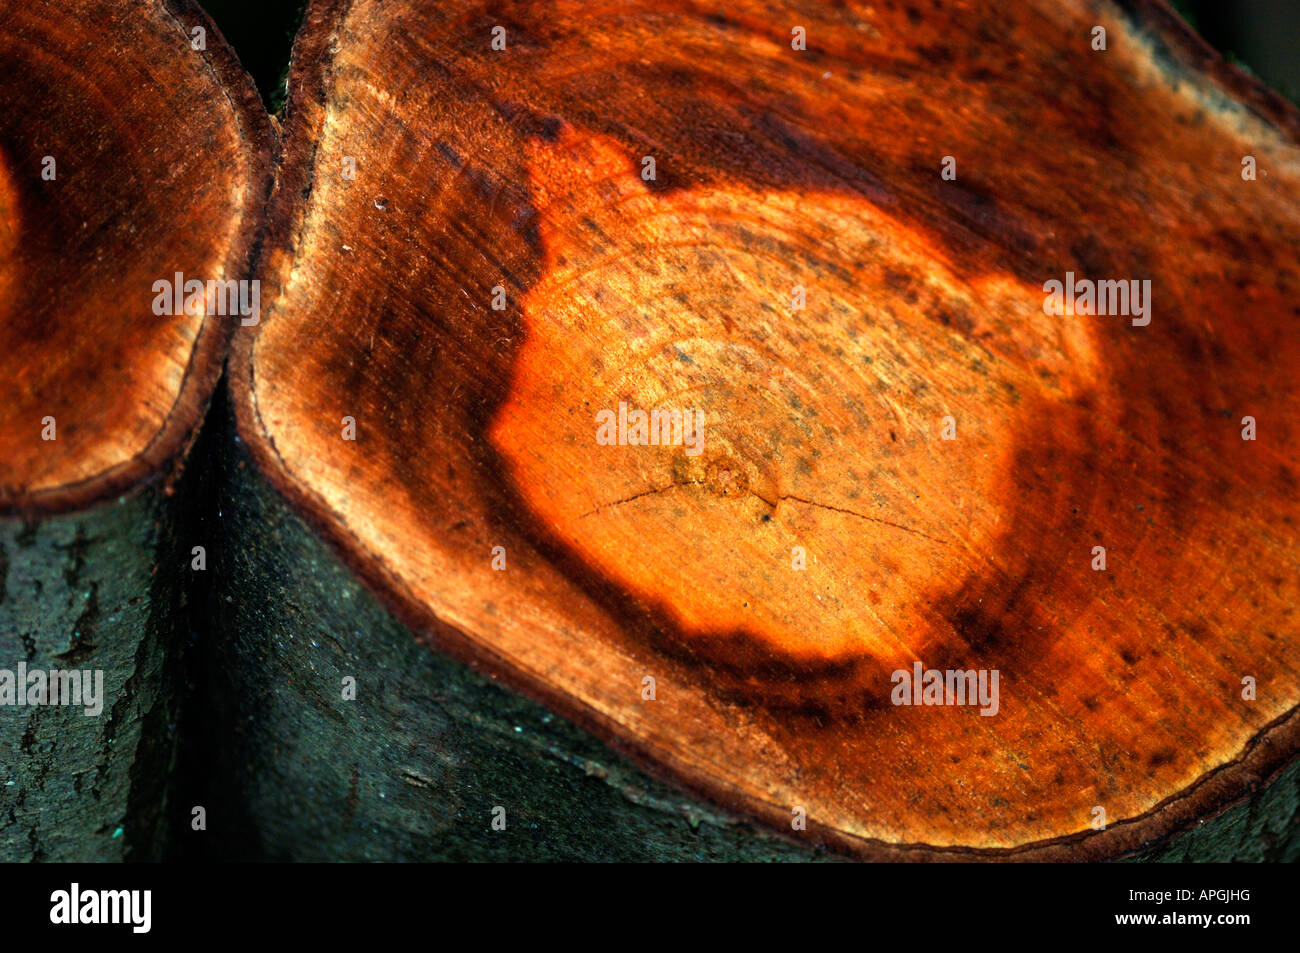 The Colourful Natural Tops Of A Tree Stumps. Stock Photo